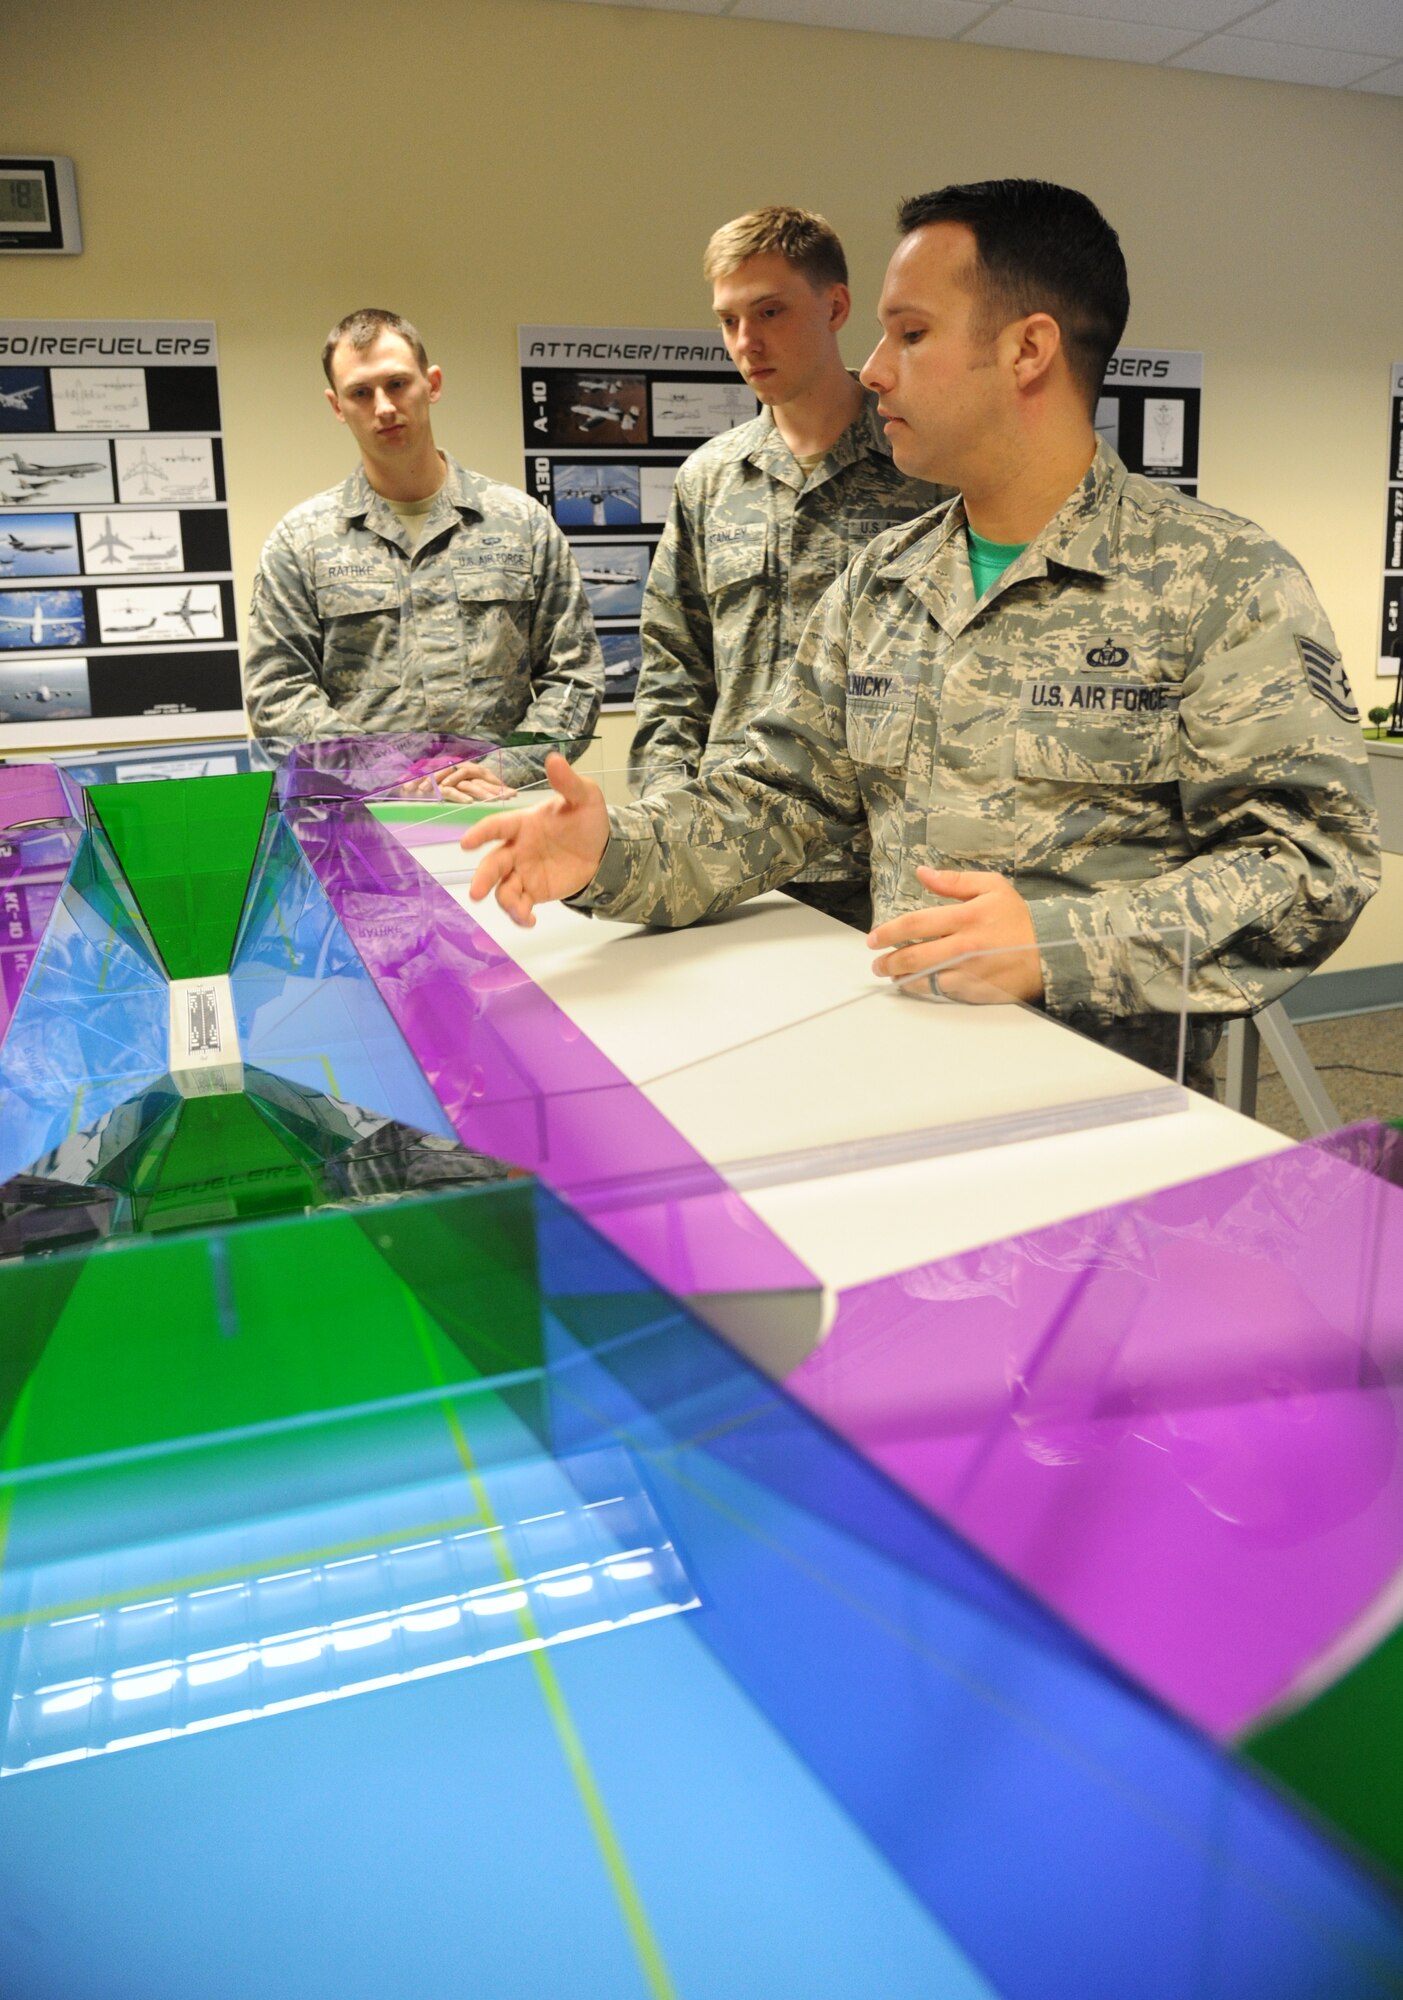 Senior Airmen Ryan Rathke and Marc Stanley, 334th Training Squadron students, listen to Staff Sgt. Courtney Polnicky, 334th TRS airfield management instructor, discuss the training capabilities the new model airfield training aid table offers Dec. 12, 2014, at Cody Hall, Keesler Air Force Base, Miss.  Utilizing the model, which is a scaled representation of an airfield, will increases understanding, productivity and efficiency in the classroom. (U.S. Air Force photo by Kemberly Groue)